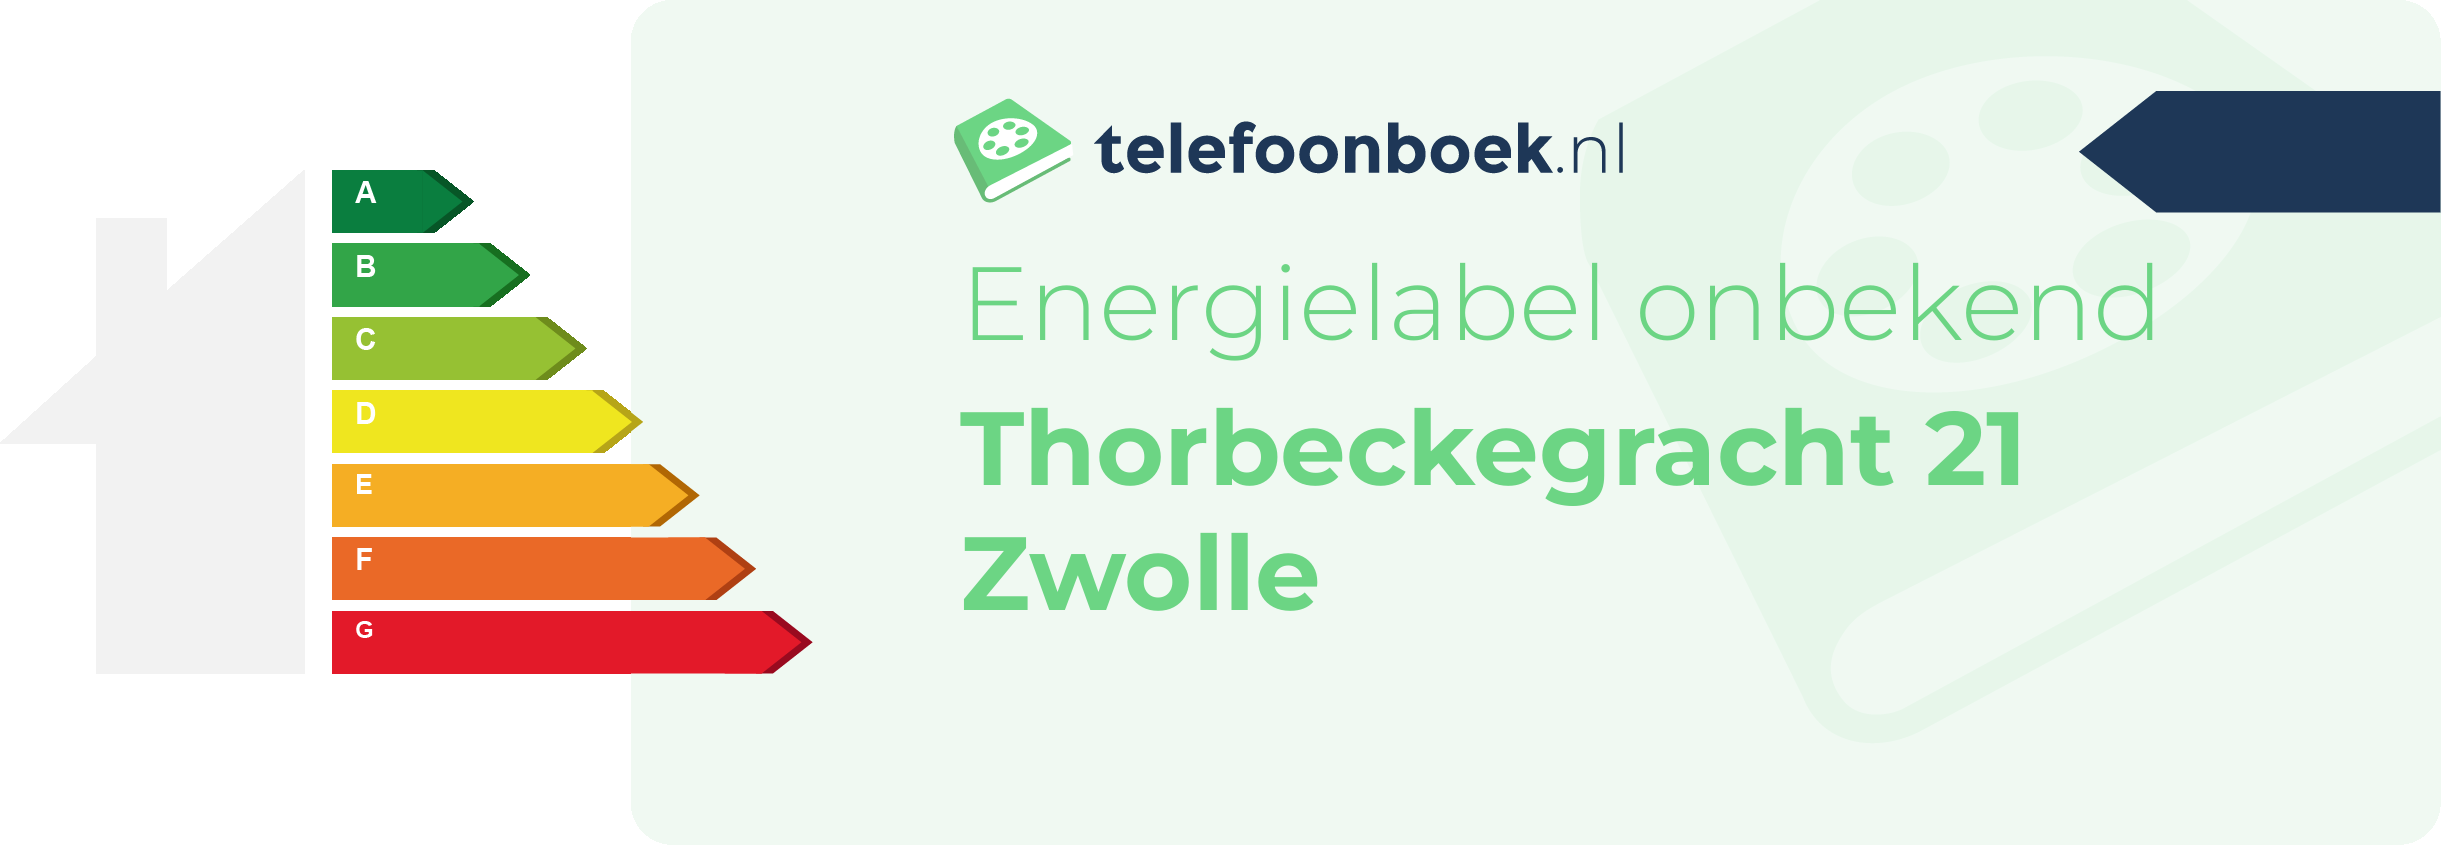 Energielabel Thorbeckegracht 21 Zwolle